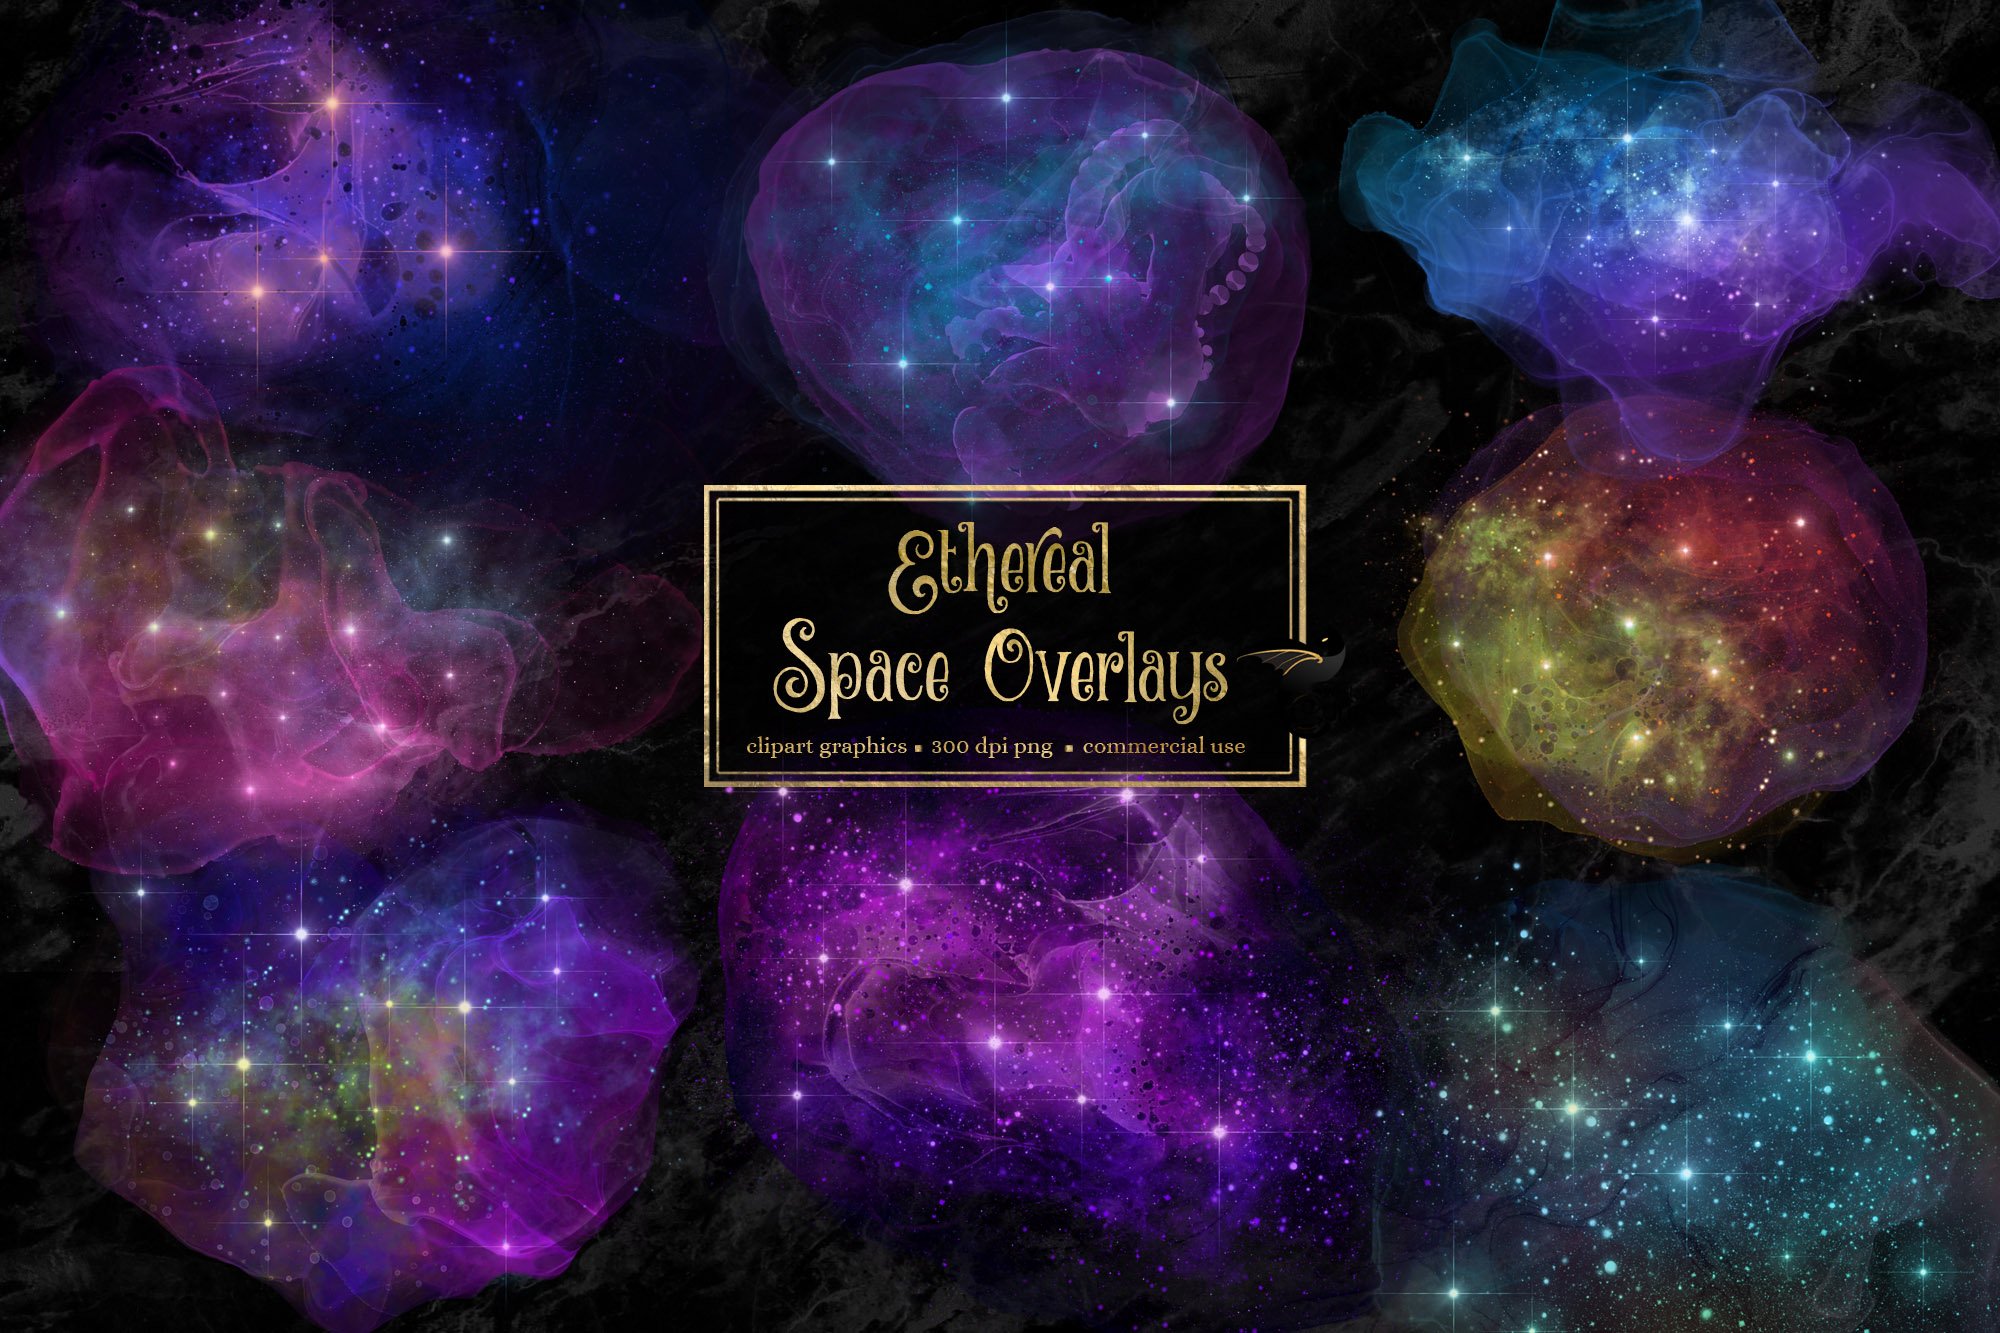 Ethereal Space Overlays cover image.